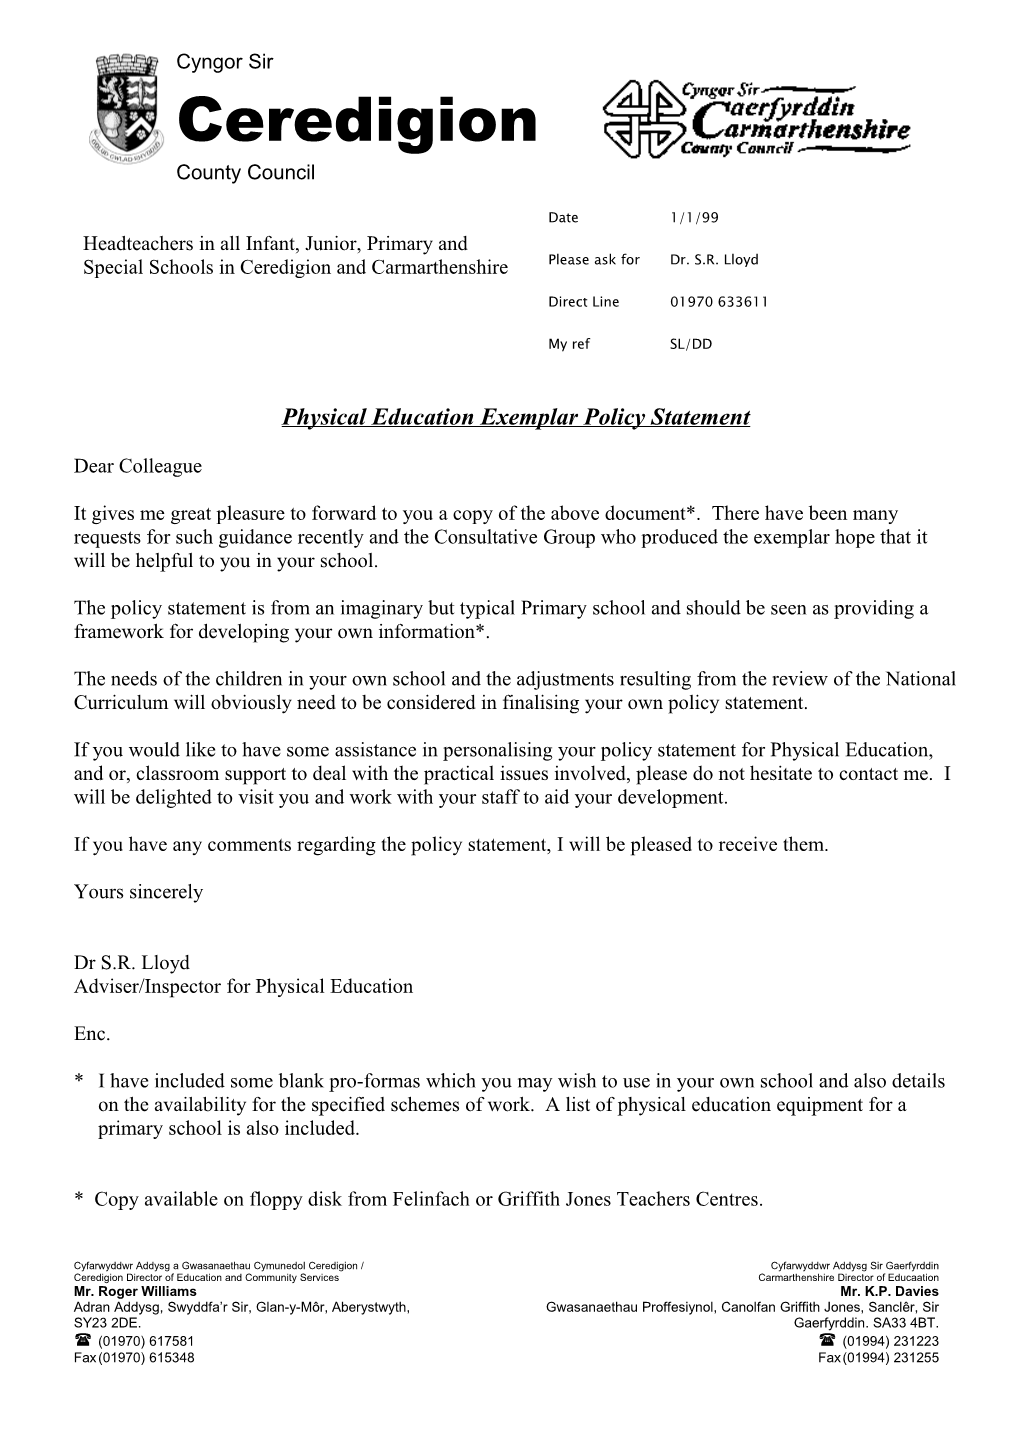 Physical Education Exemplar Policy Statement